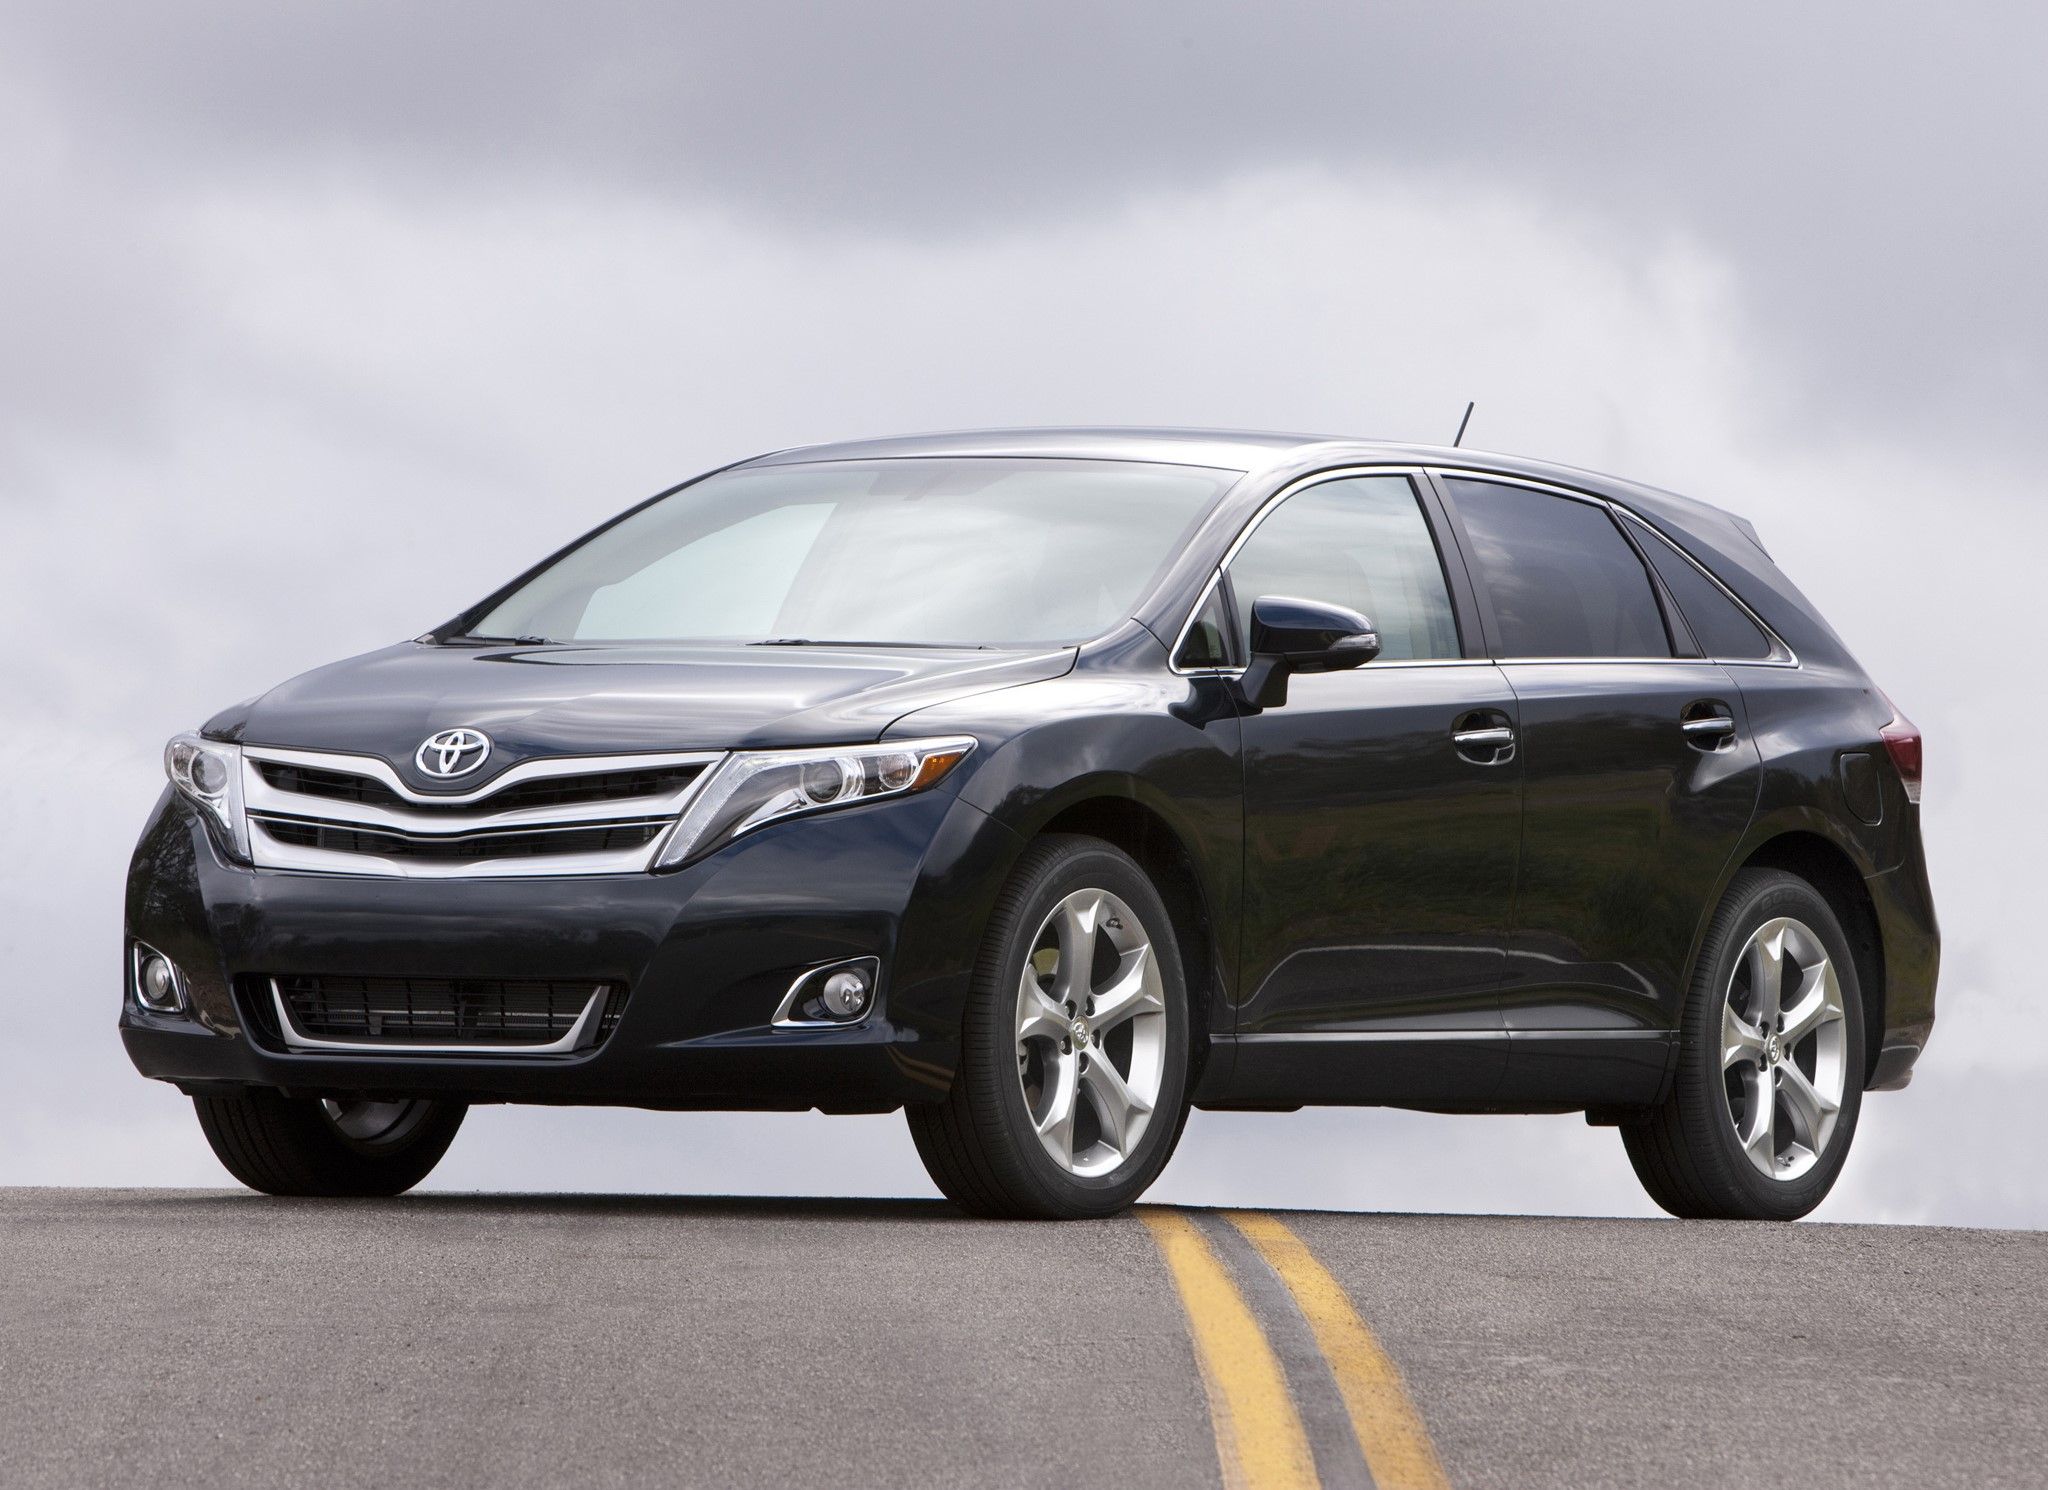 pictures_toyota_venza_2012_3